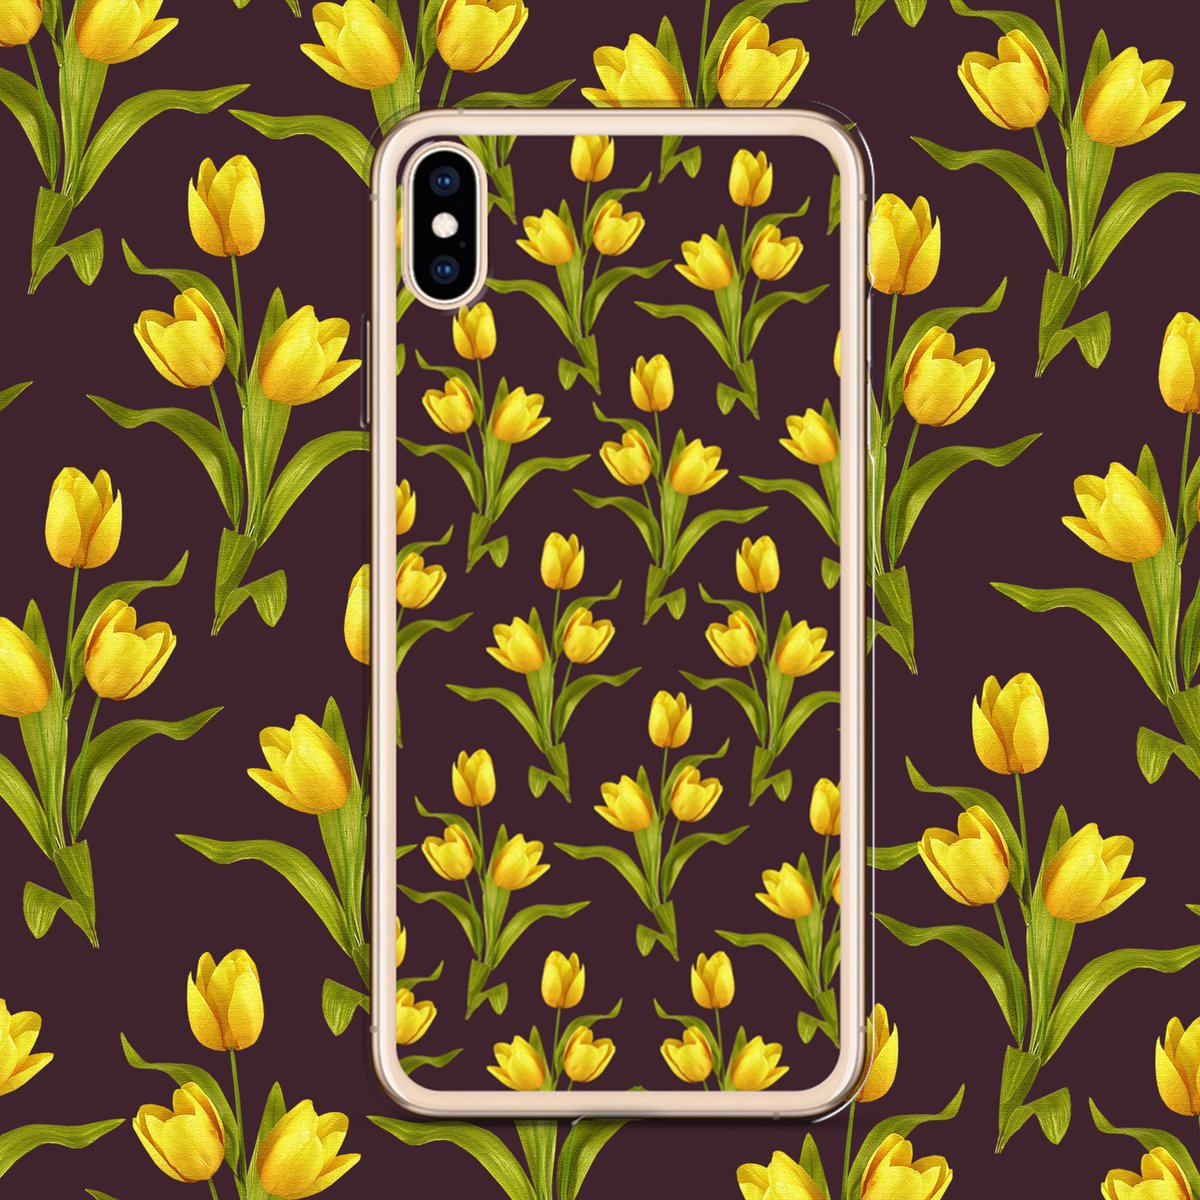 Spring is here! ✨explore the new collection of iPhone cases 🌷Link in Bio ✨ ⁣
.⁣
.⁣
.⁣
.⁣
.⁣
#flowers #phonecases #onlineshopping #iphone11 #accessories #flowers #cellphonecase #phonecovers #customcase #phoneaccessories #love #casemurah #phone #tulips #vintage